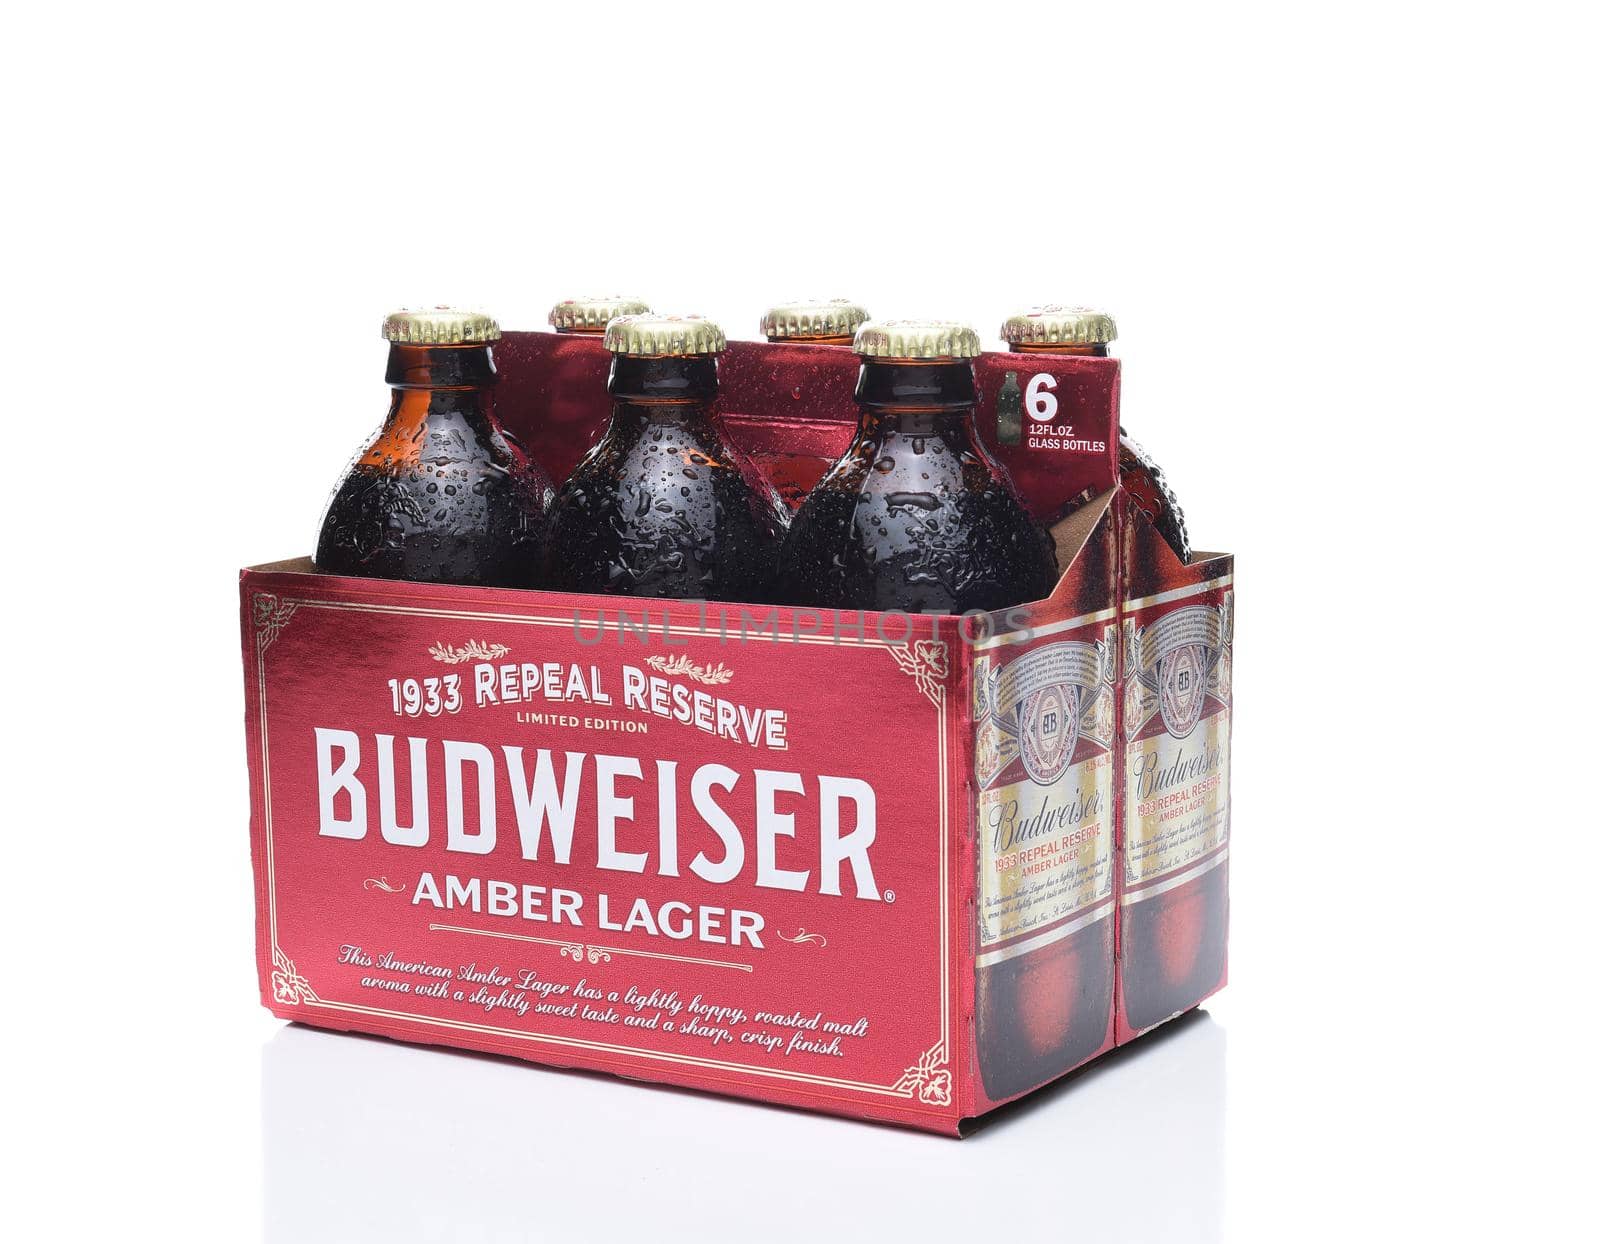 IRVINE, CA - NOVEMBER 7, 2017: Budweiser 1933 Repeal Reserve Amber Lager. Budweiser is releasing this historically inspired recipe to celebrate the Repeal of Prohibition.